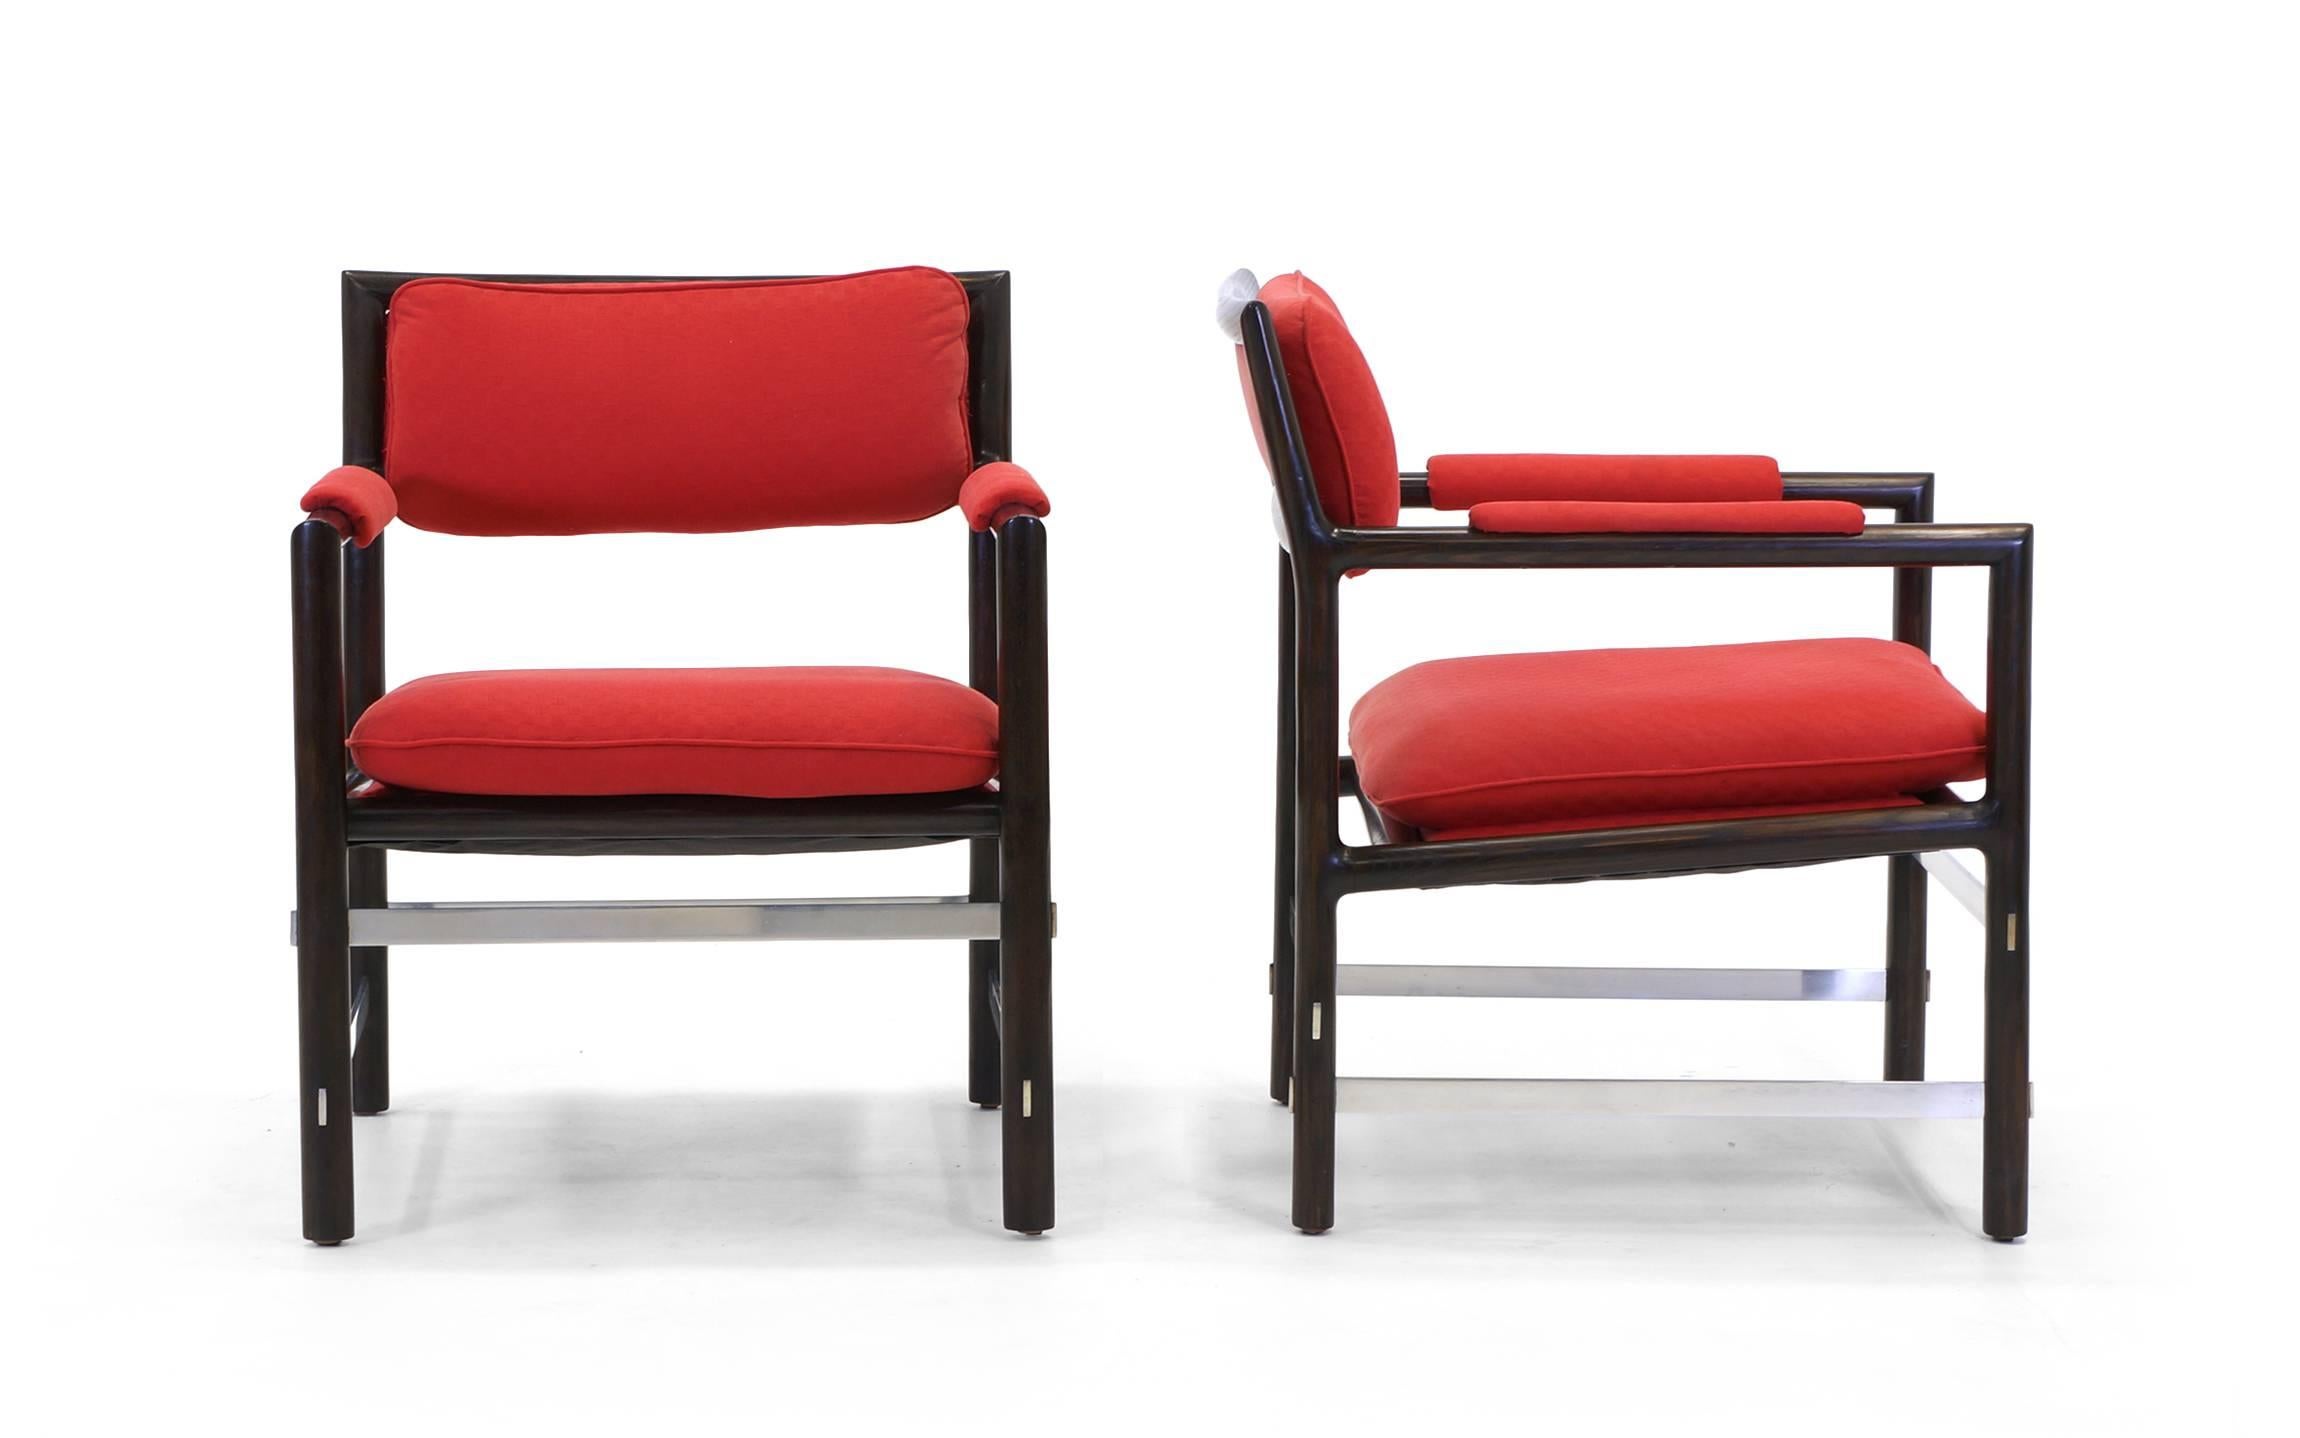 Stunning pair of Edward Wormley for Dunbar armchairs. Dark African mahogany frames with intersecting brushed steel cross stretchers. The red fabric is in very good condition. These chairs were reupholstered approximately five years ago.